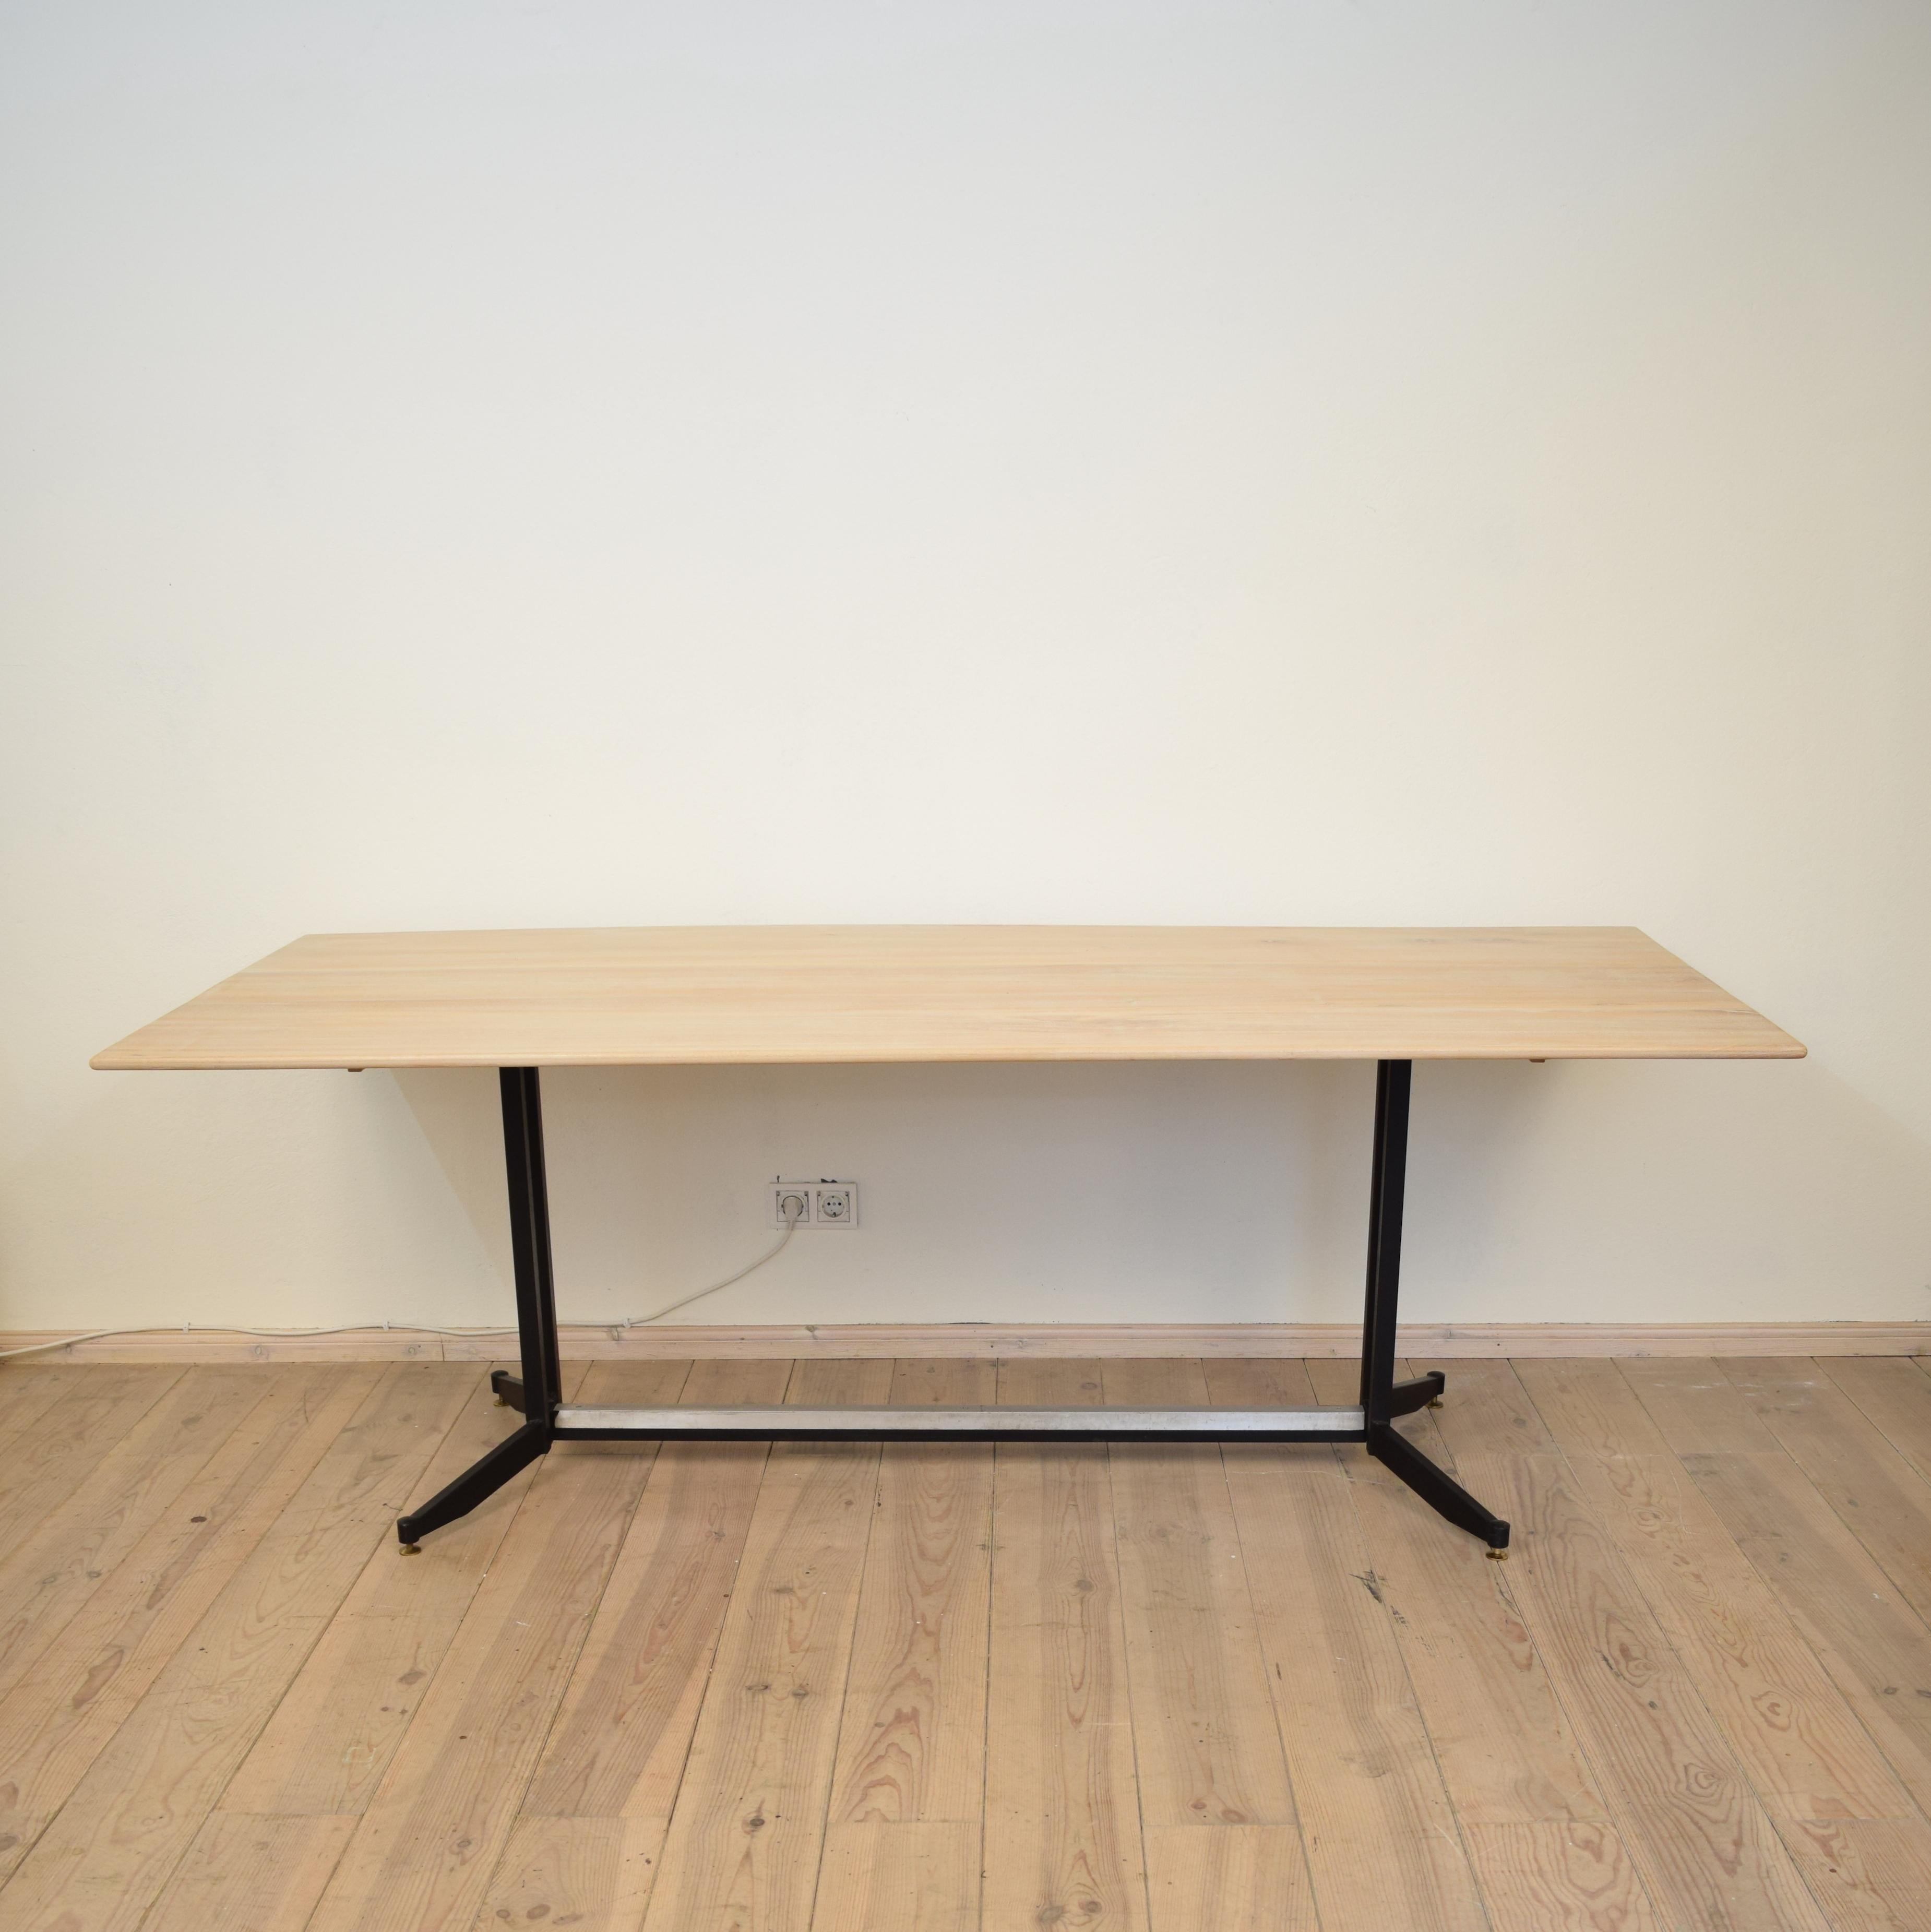 Midcentury Italian Black Lacquered Metal and Limed Elm Top Dining Table, 1950s For Sale 1